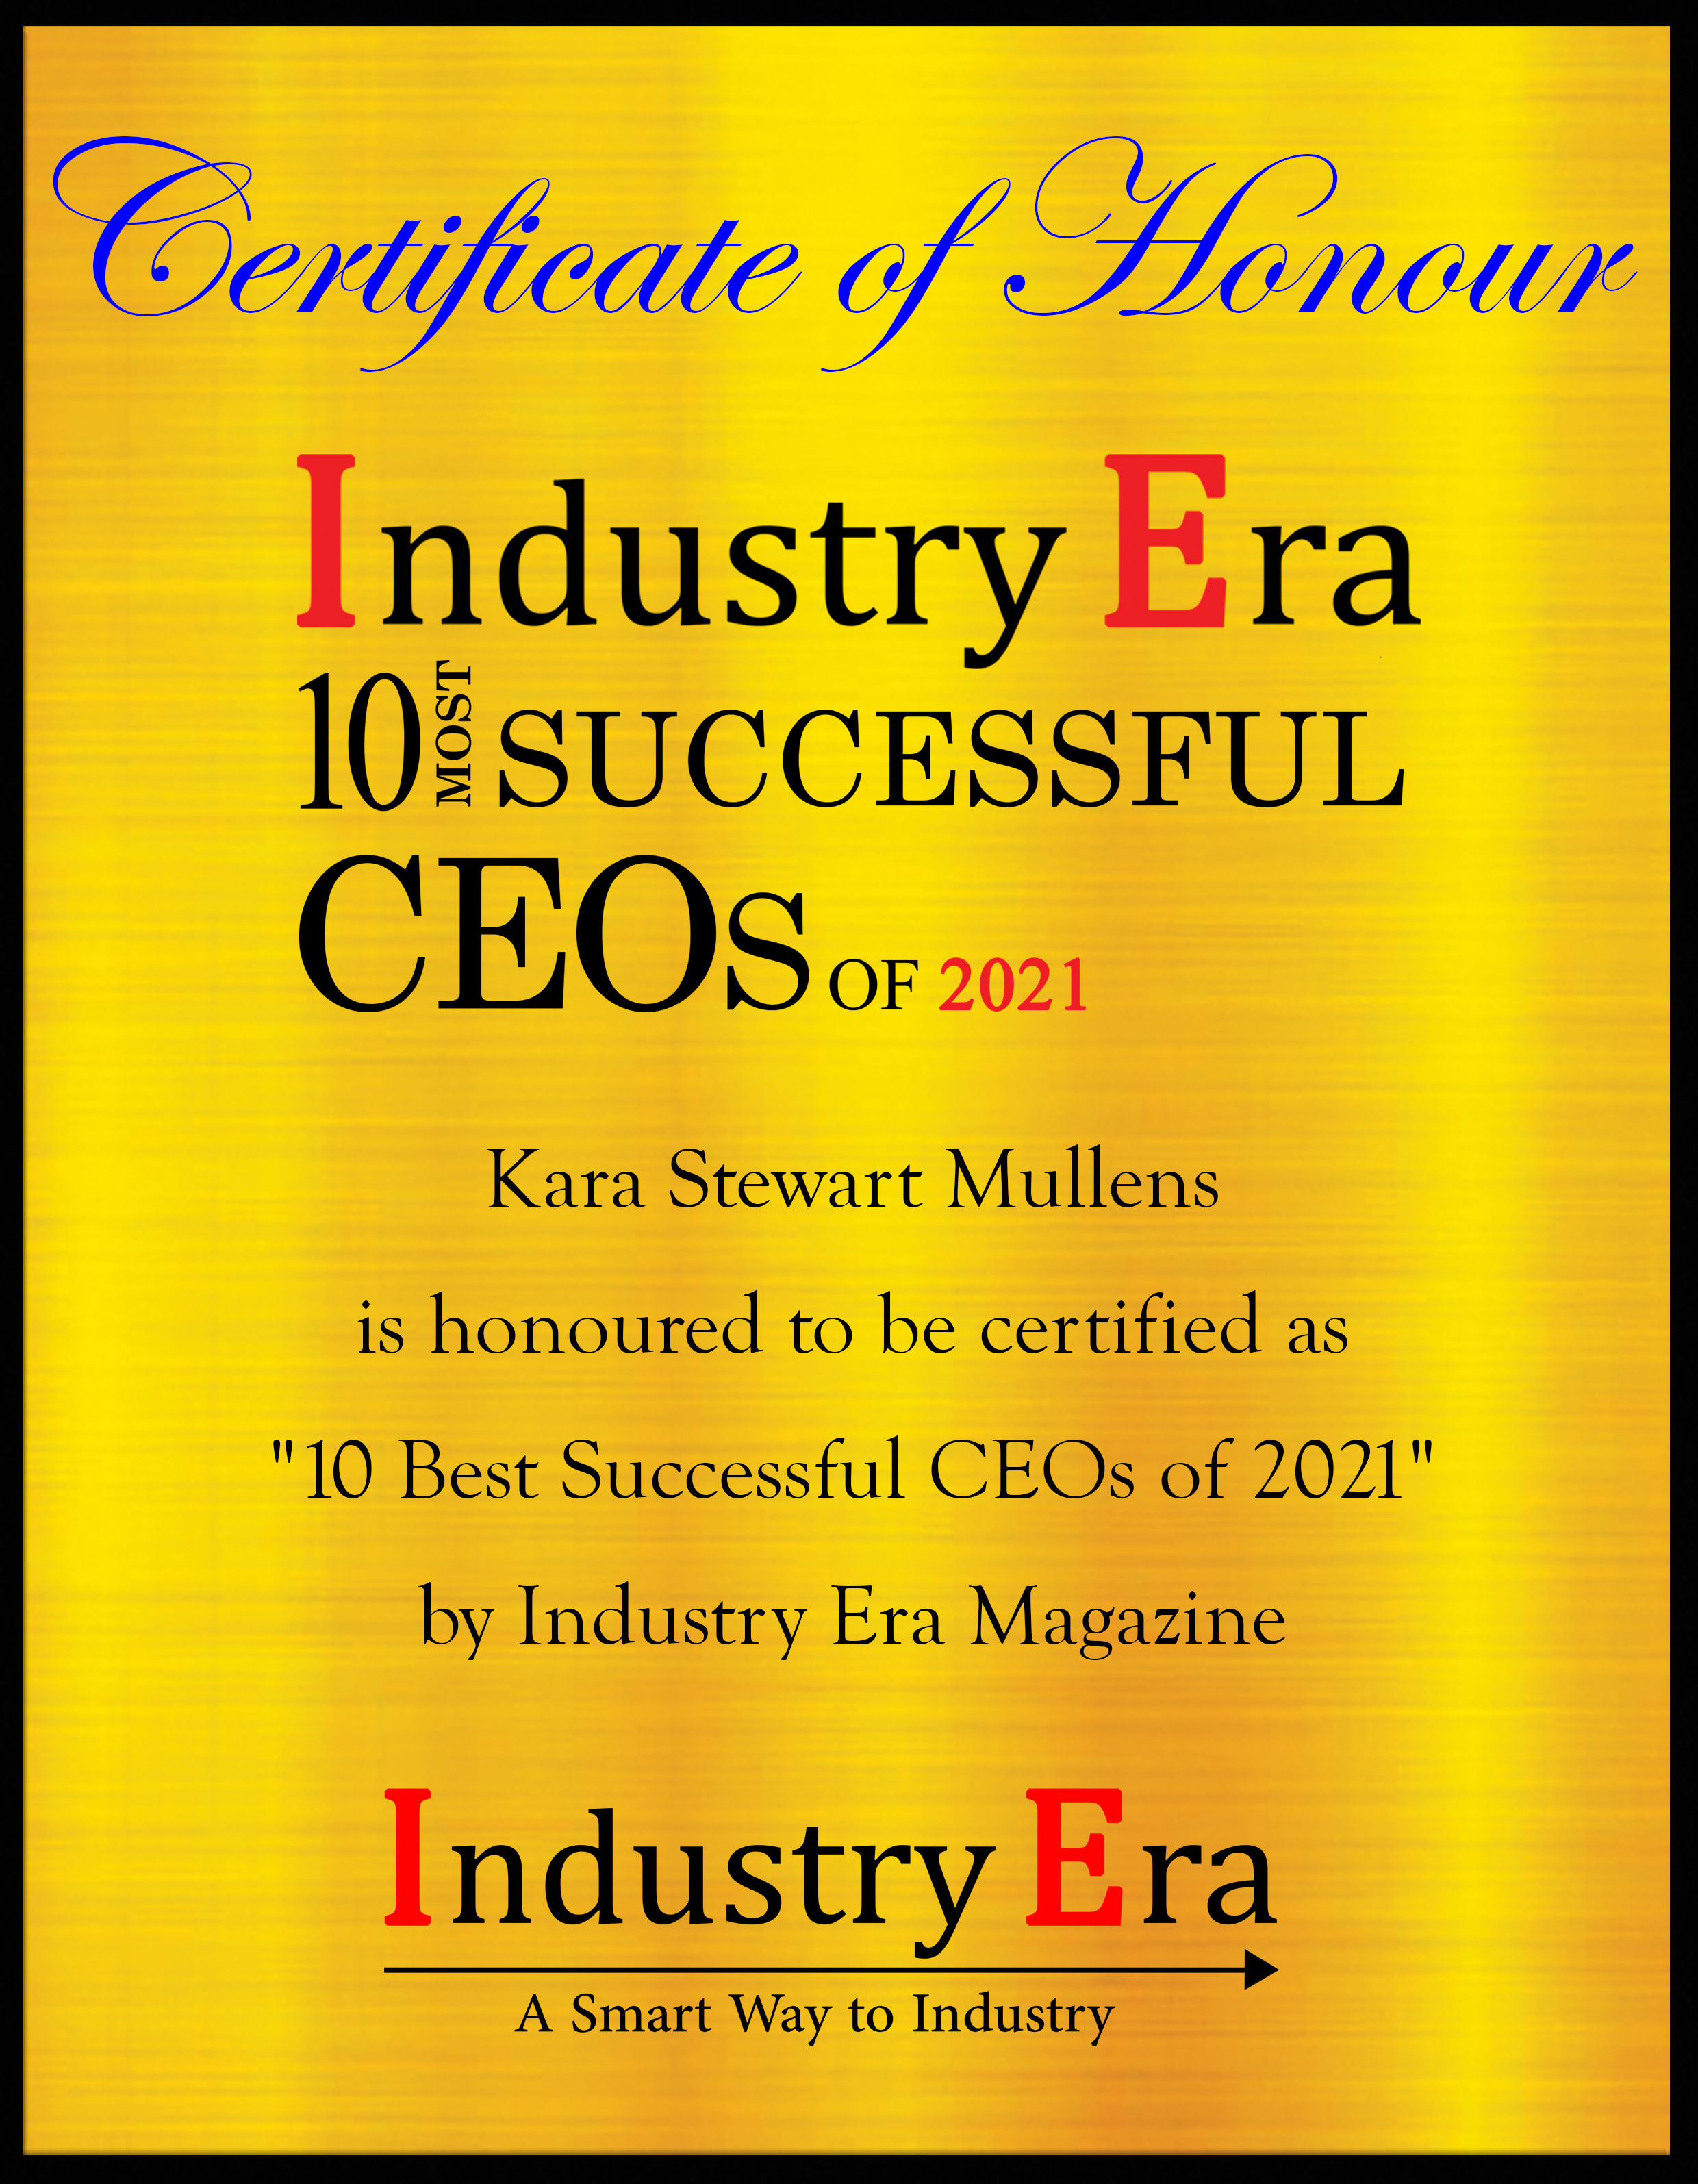 Kara Stewart Mullens, CEO and Co-founder of NeuroBiologix, Best Successful CEOs of 2021